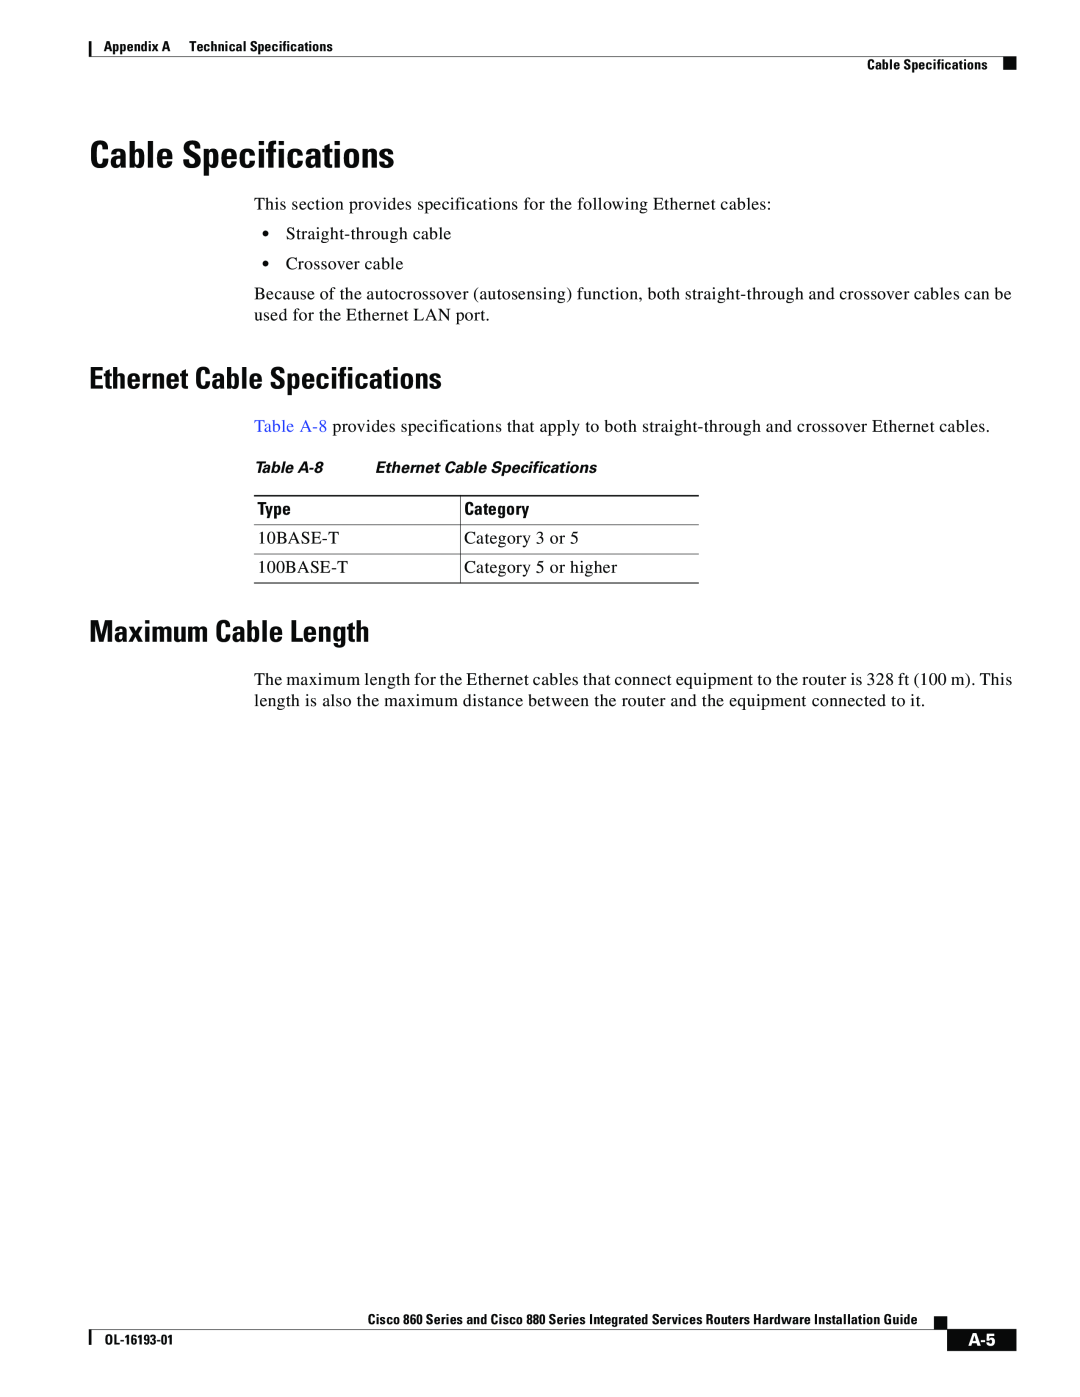 Cisco Systems 861WGNPK9RF, HIG880, C892FSPK9, 860 manual Ethernet Cable Specifications, Maximum Cable Length 